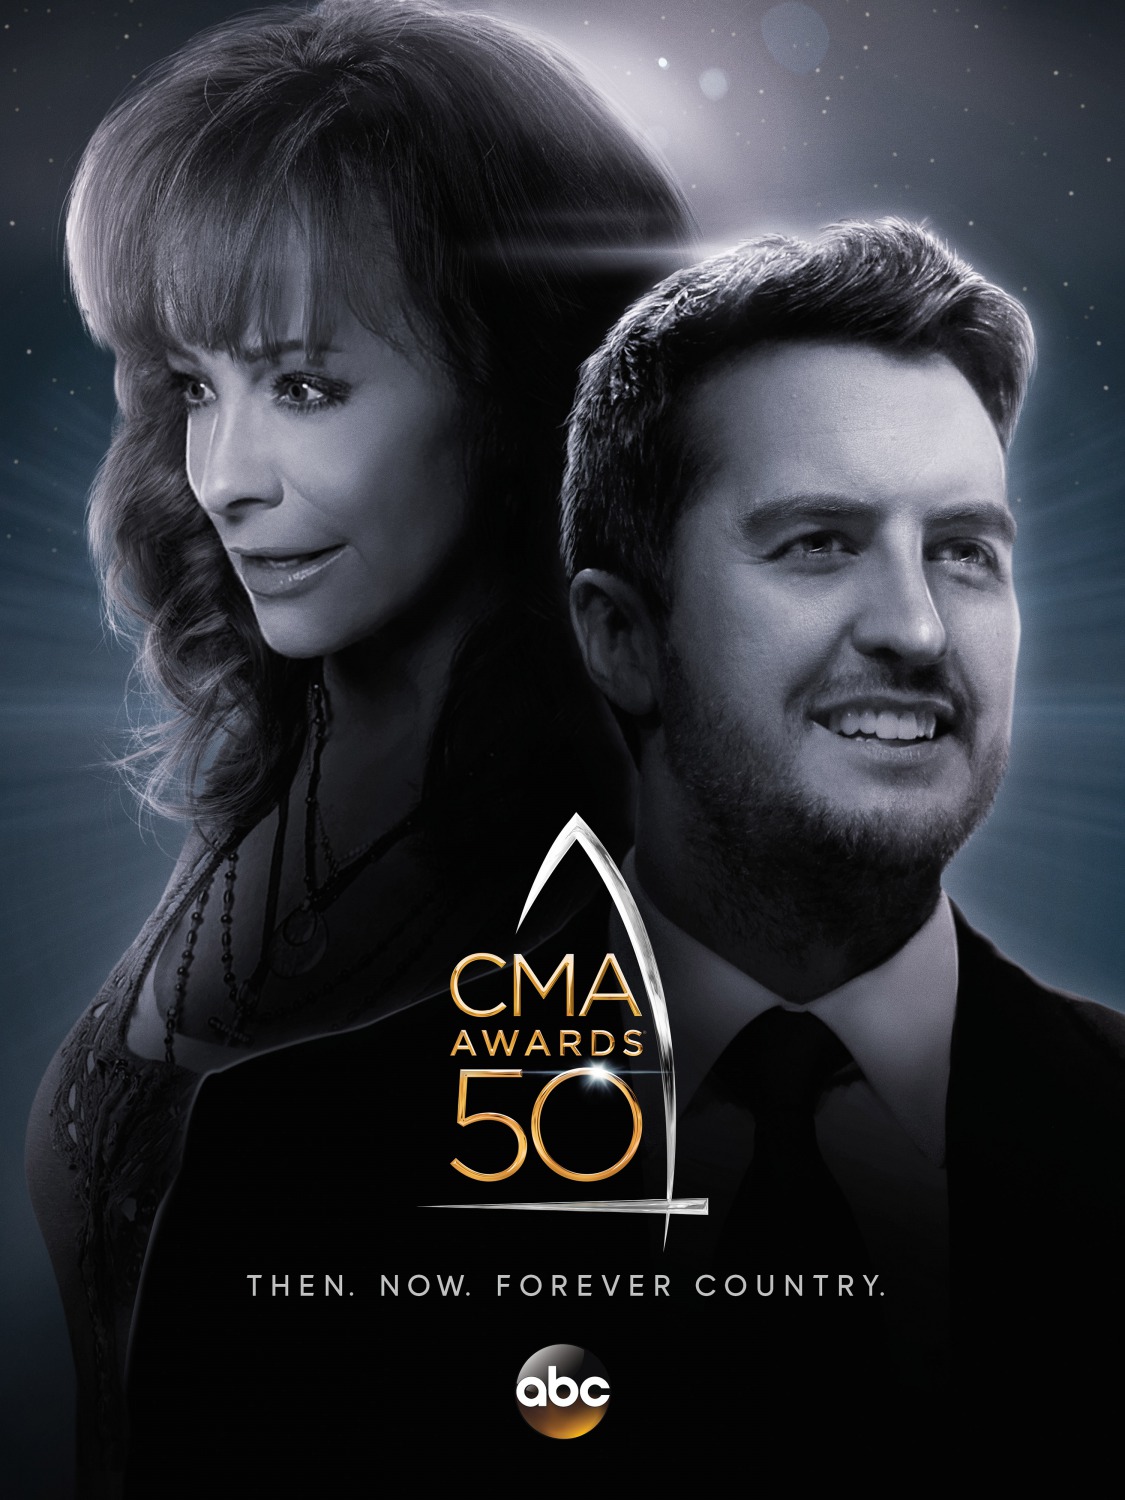 Extra Large TV Poster Image for CMA Awards (#5 of 7)